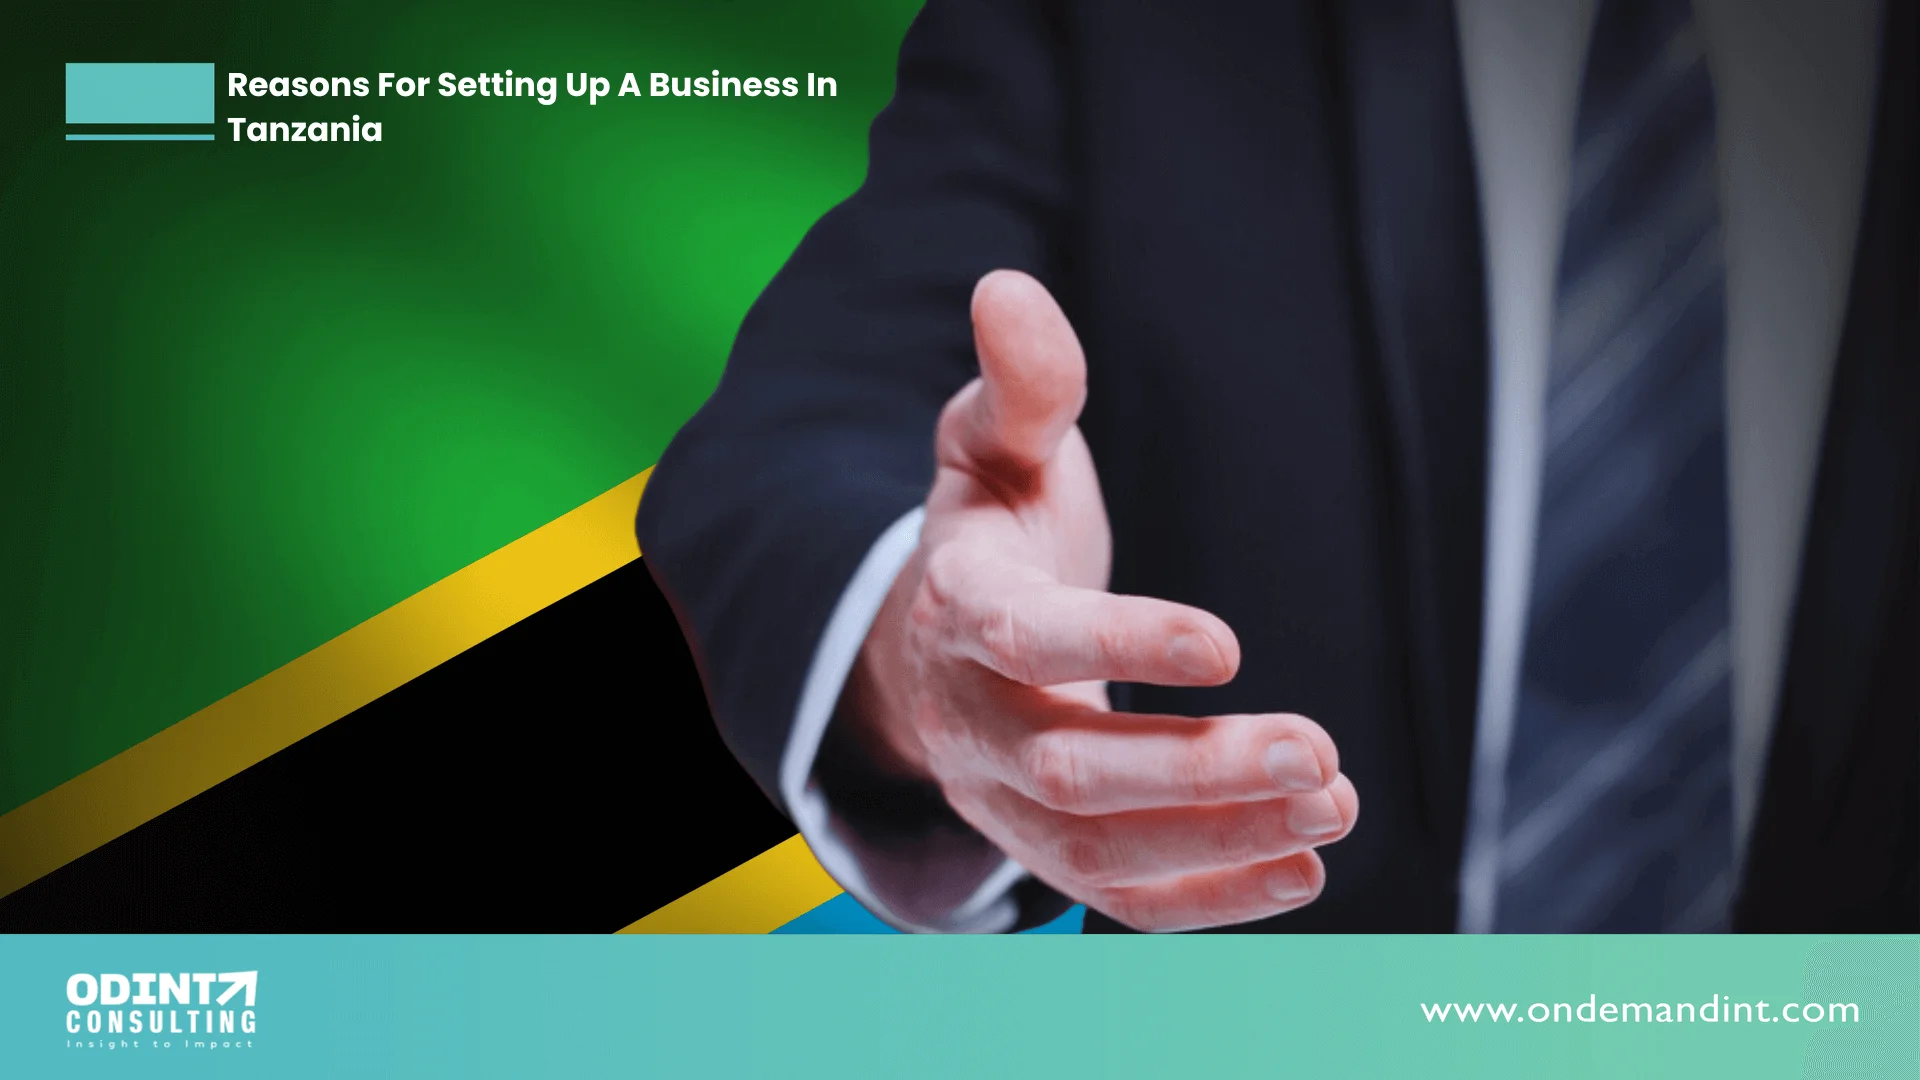 Top 7 Reasons For Setting Up A Business In Tanzania